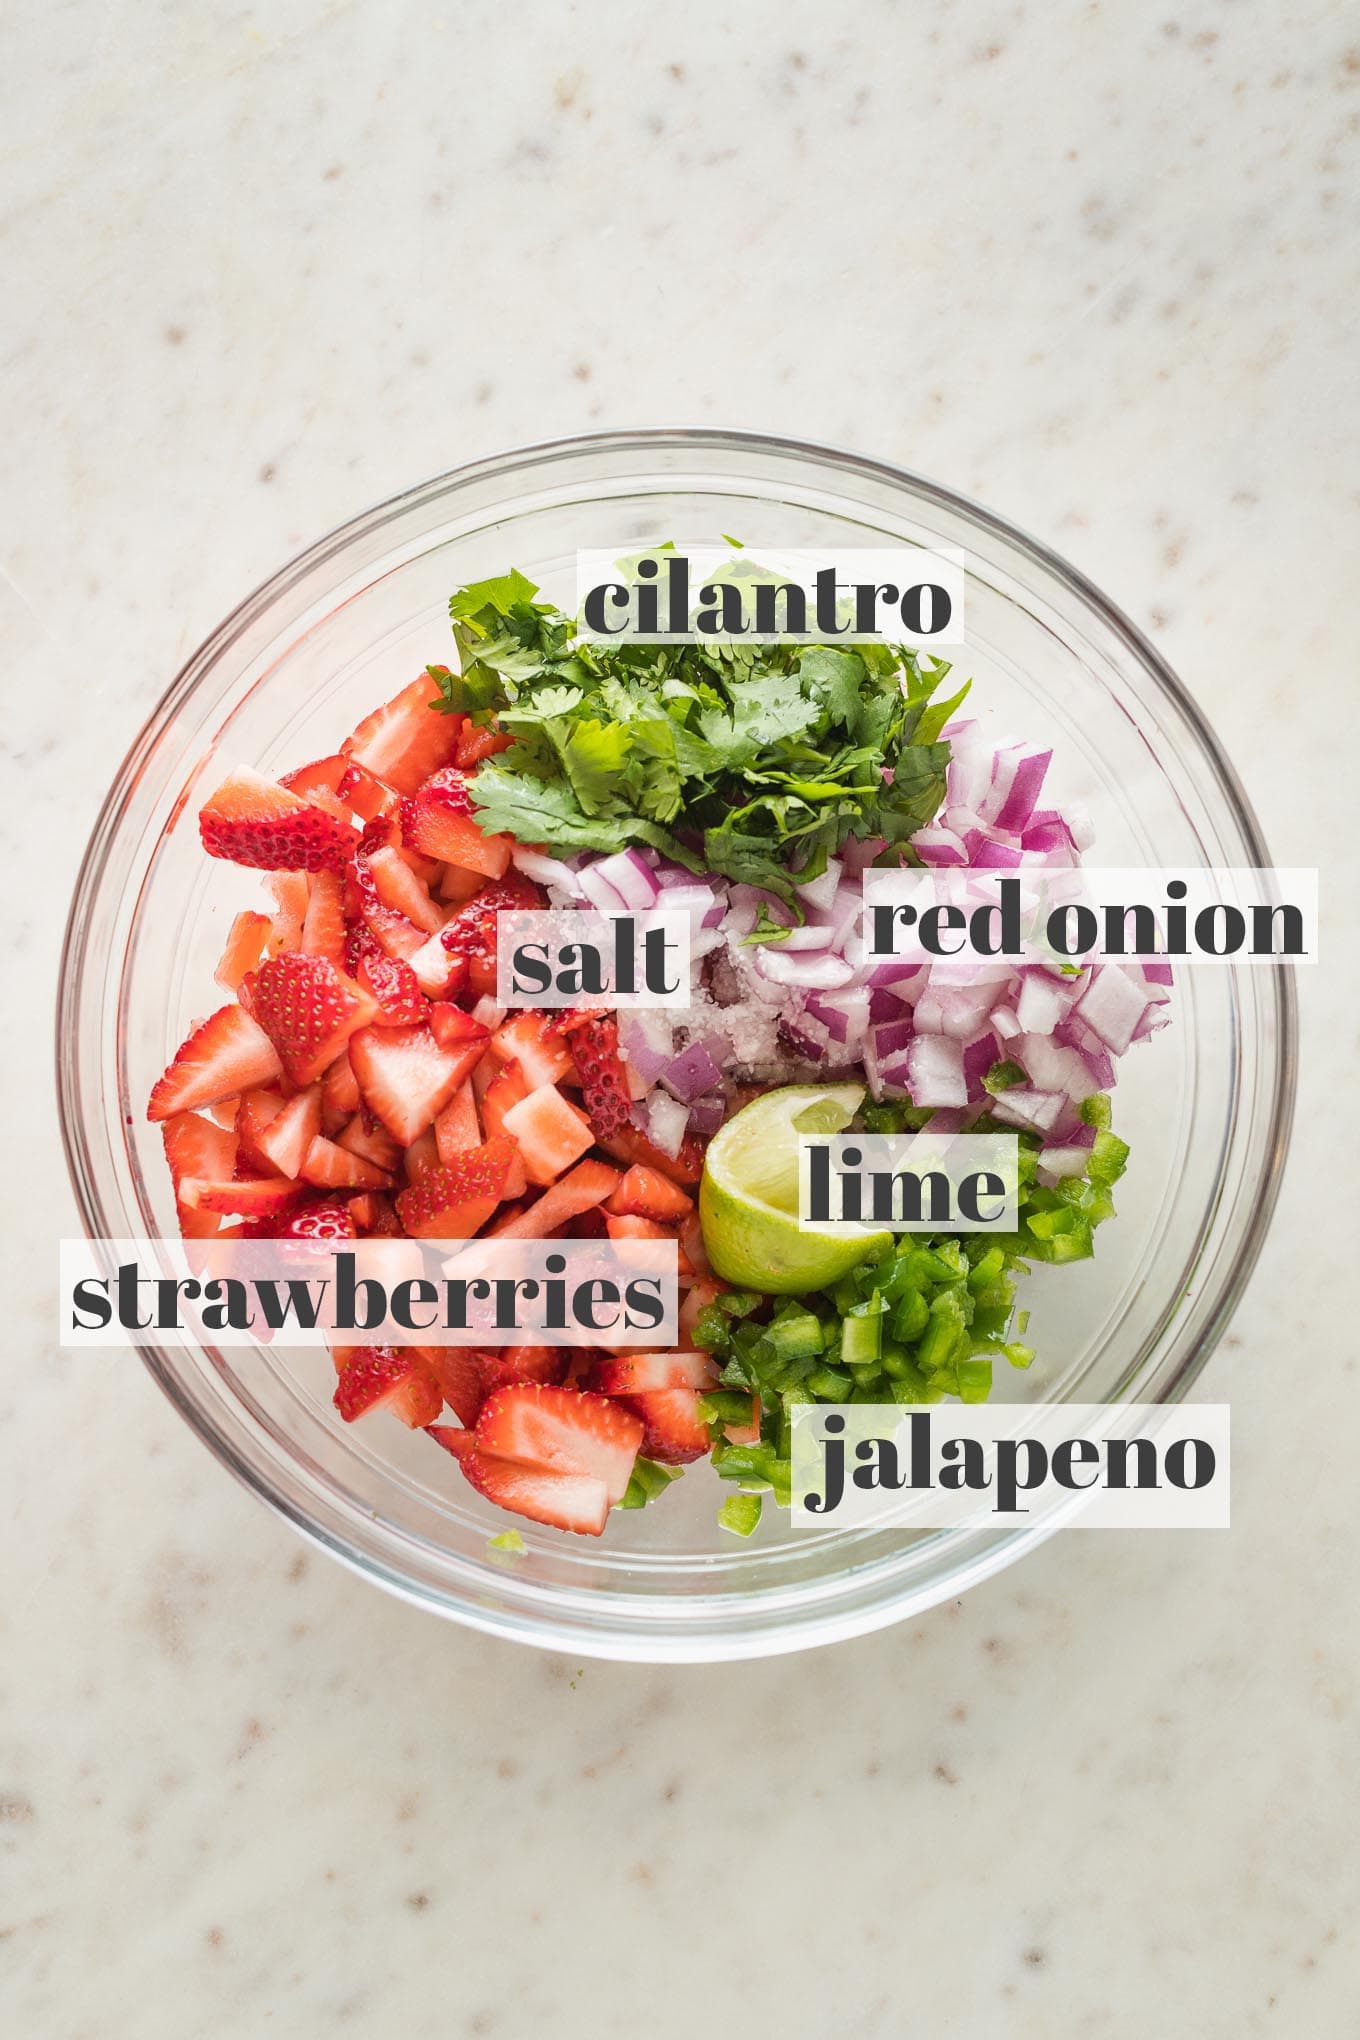 Labeled photo of strawberries, jalapeno, red onion, cilantro, lime juice, and salt in a prep bowl.